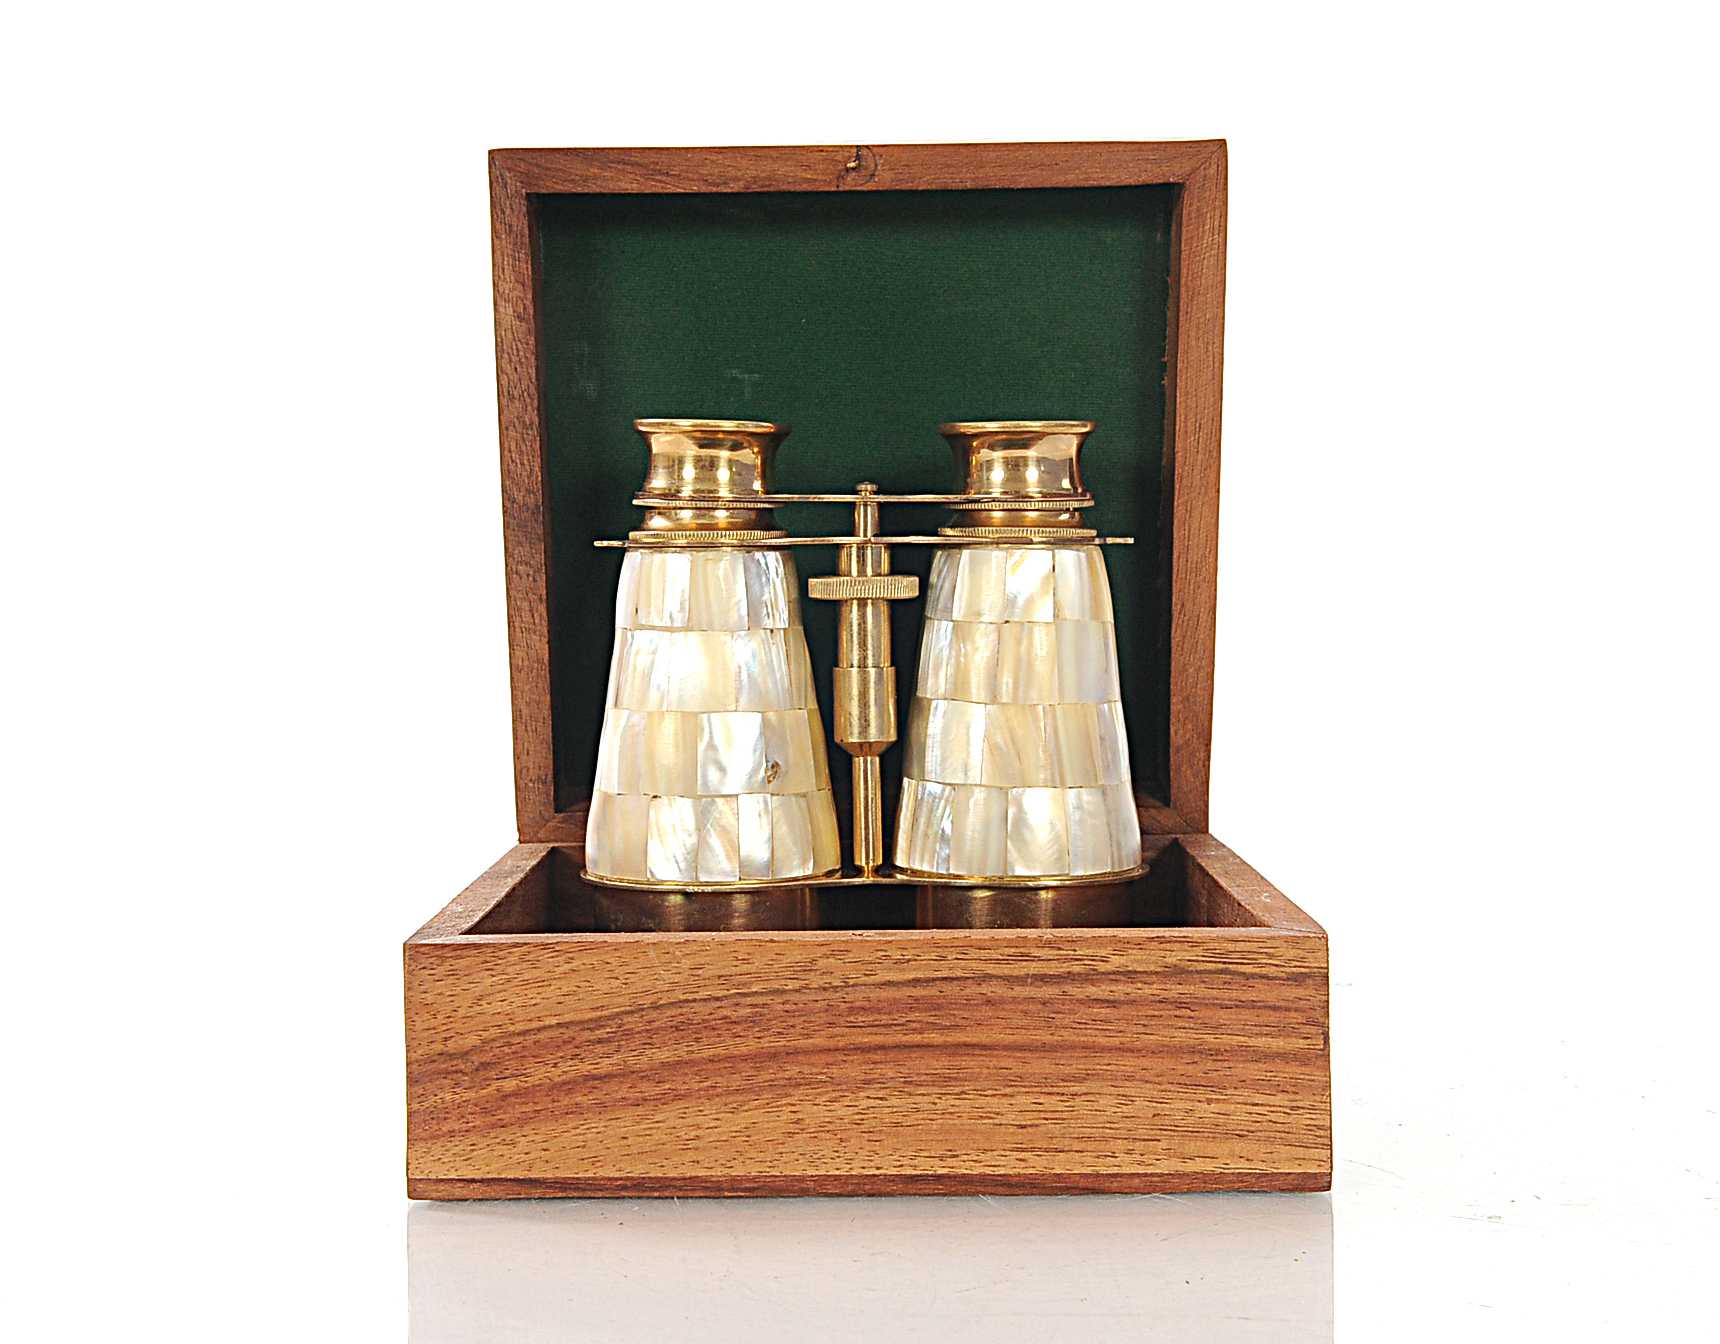 Elegant-Brass-And-Mother-Of-Pearl-Binoculars-In-Wooden-Storage-Box-Sculptures-&-Statues